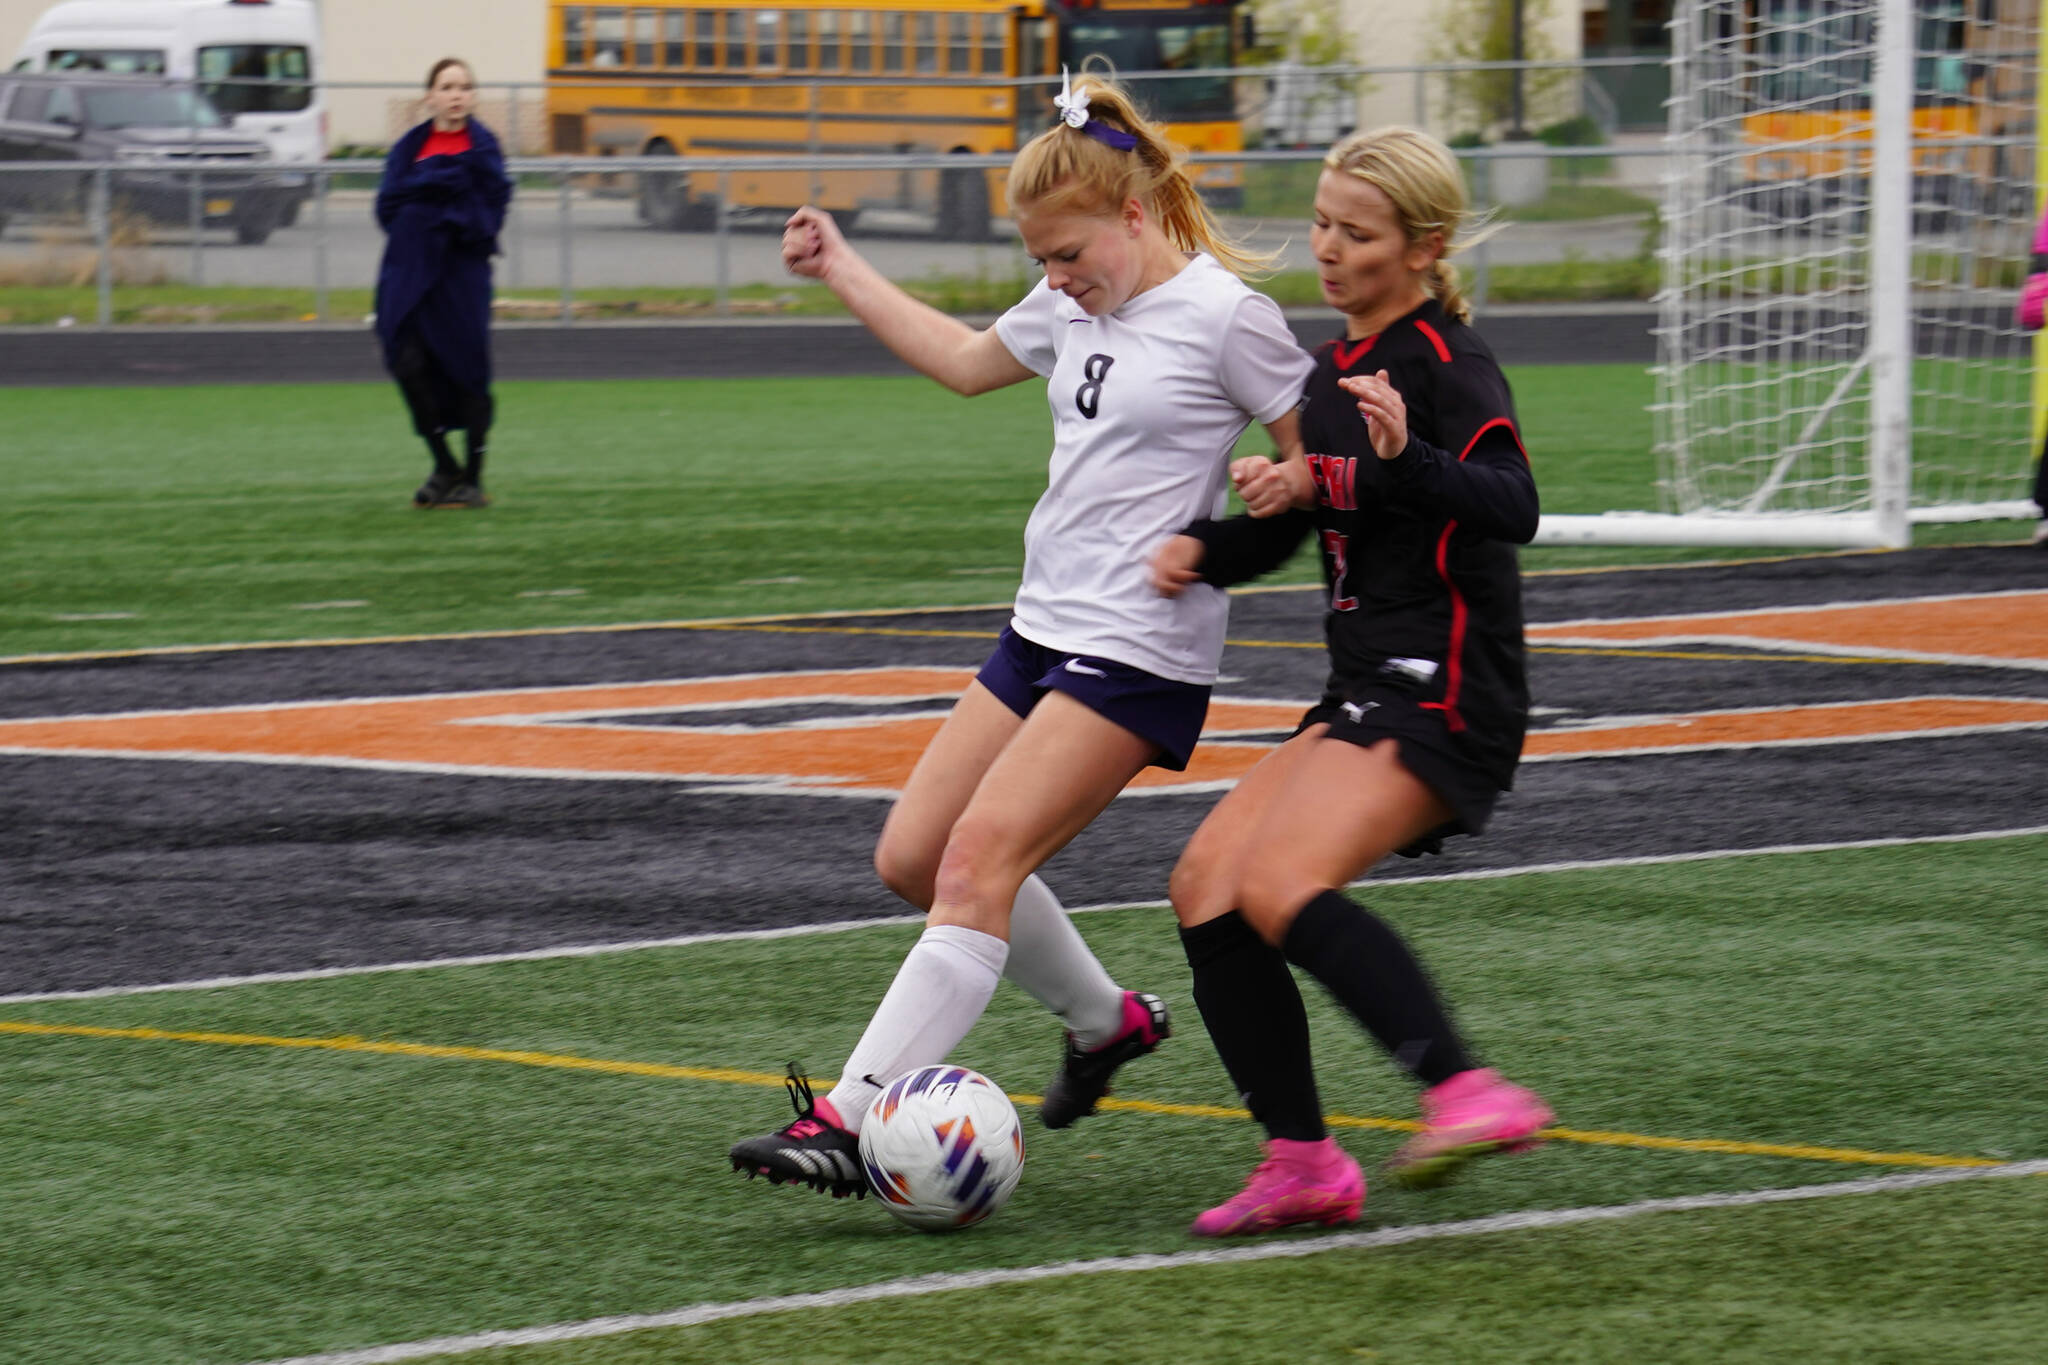 Soldotna’s Keely Sundberg battles for the ball with Kenai Central’s Kate Wisnewski during the Division II Soccer State Championship on Saturday, May 27, 2023, at West Anchorage High School in Anchorage, Alaska. (Jake Dye/Peninsula Clarion)